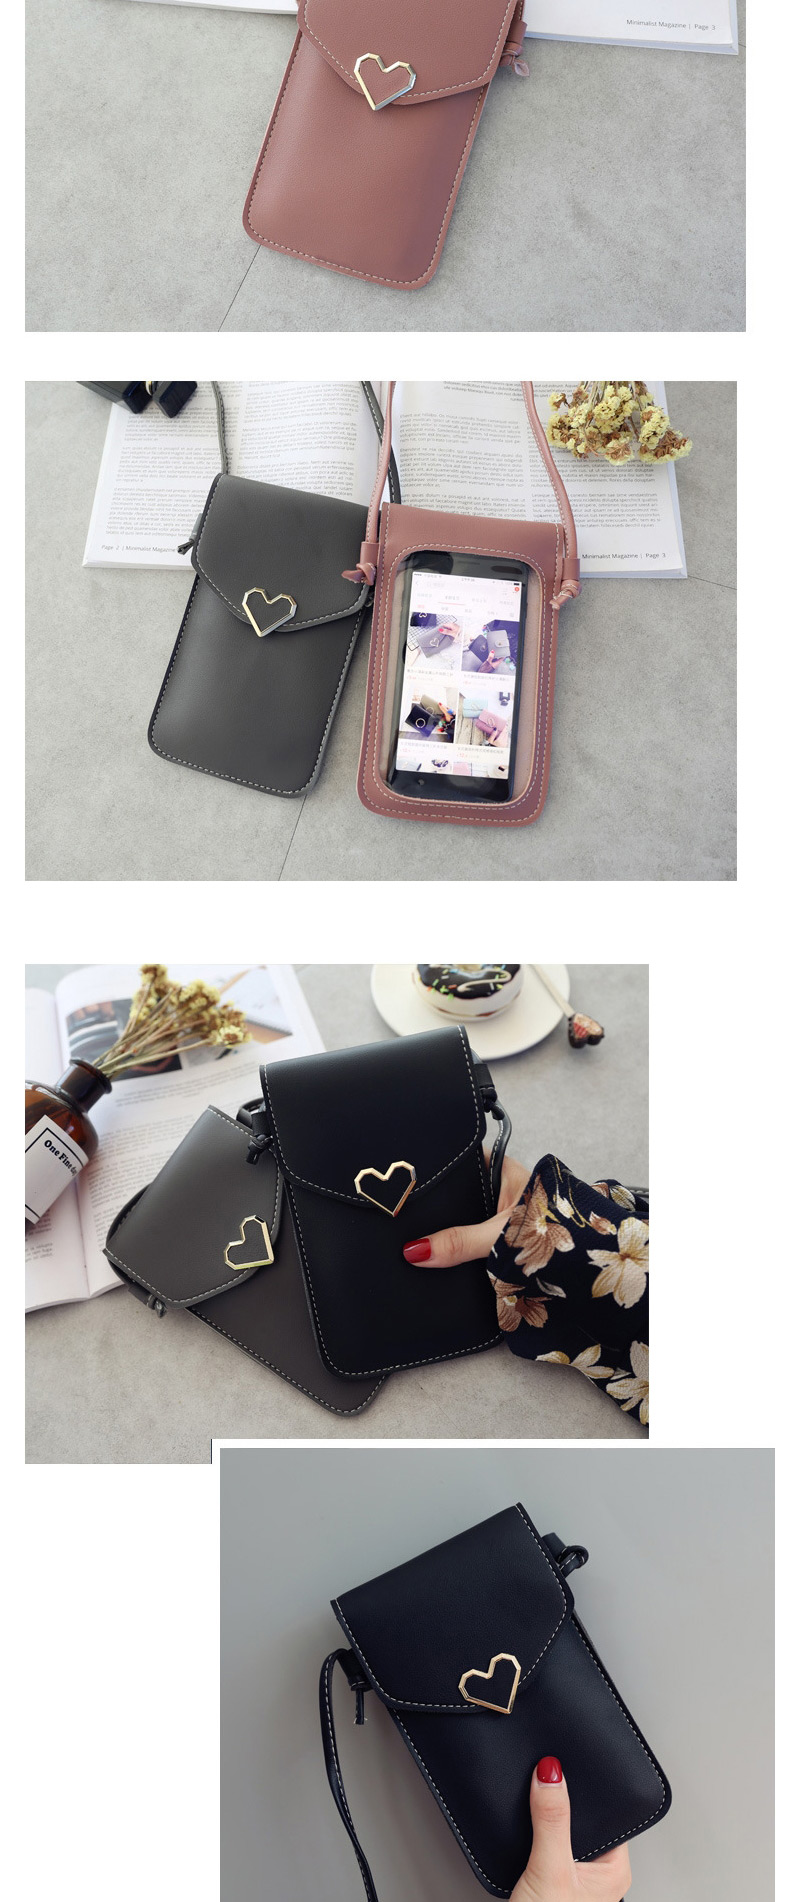 Fashion Light Grey Caring Metal Transparent Touch Screen Multifunctional Mobile Phone Bag,Shoulder bags